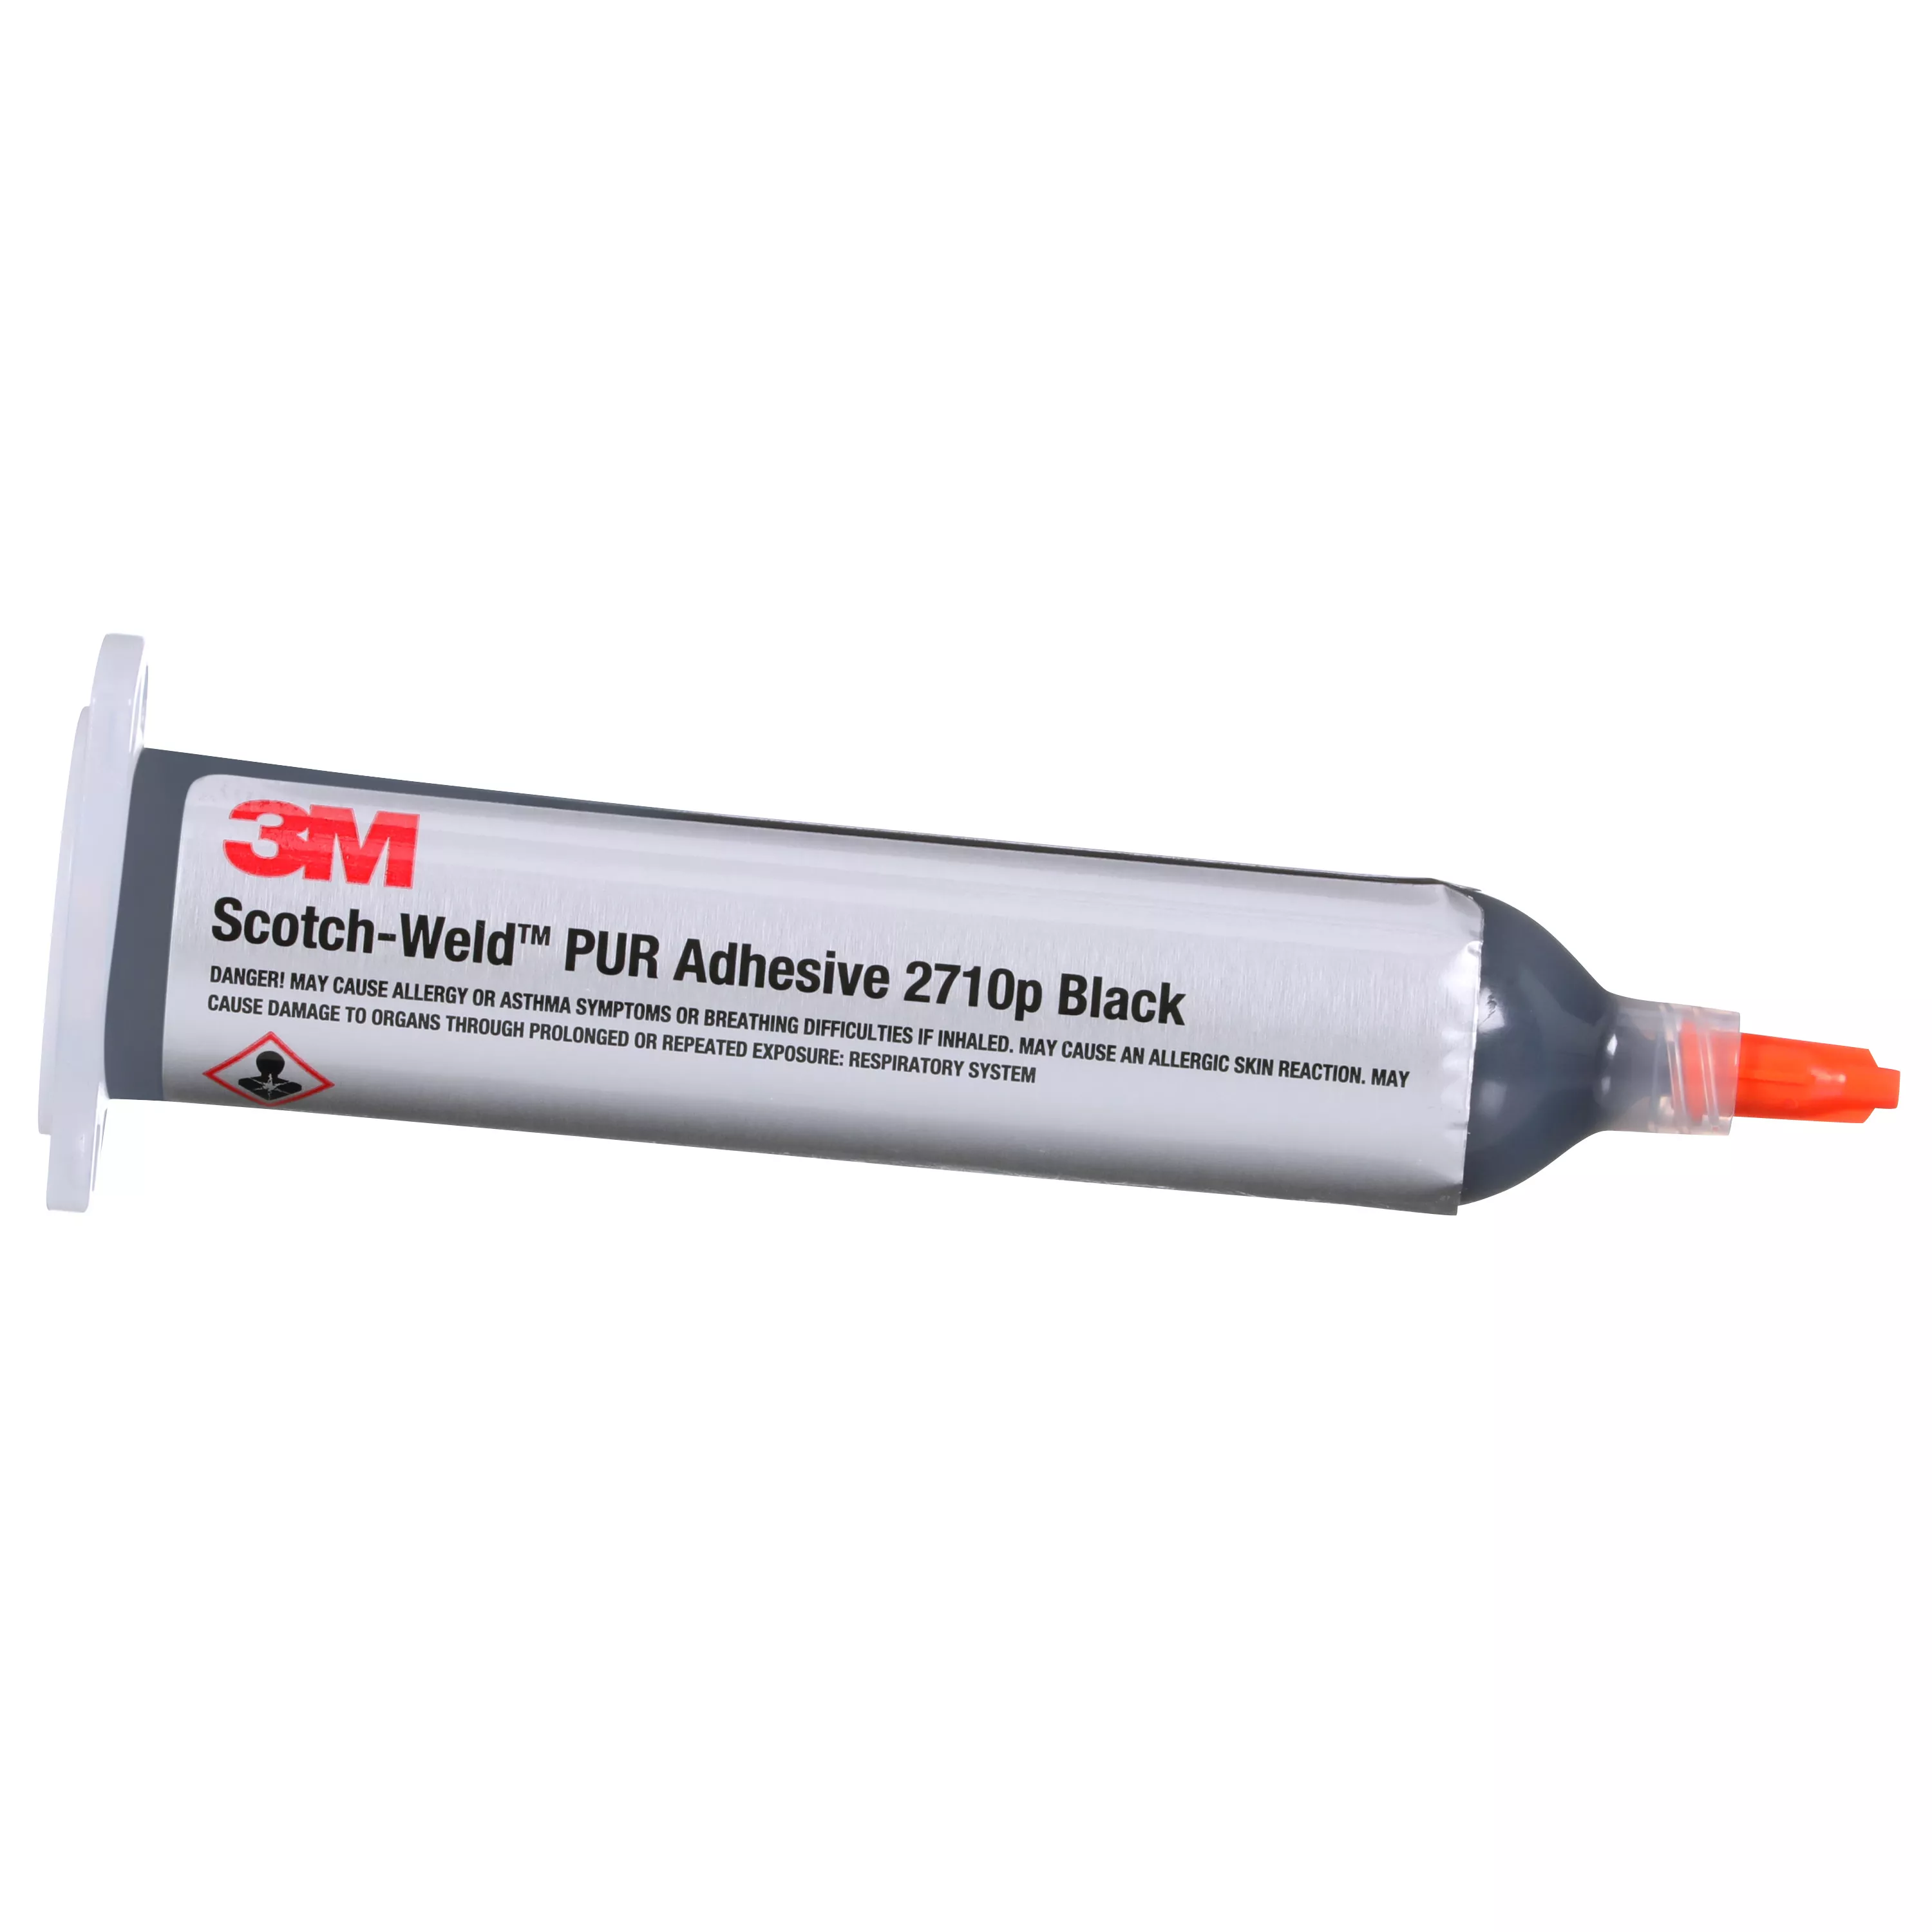 Product Number 2710p | 3M™ Scotch-Weld™ PUR Adhesive 2710P